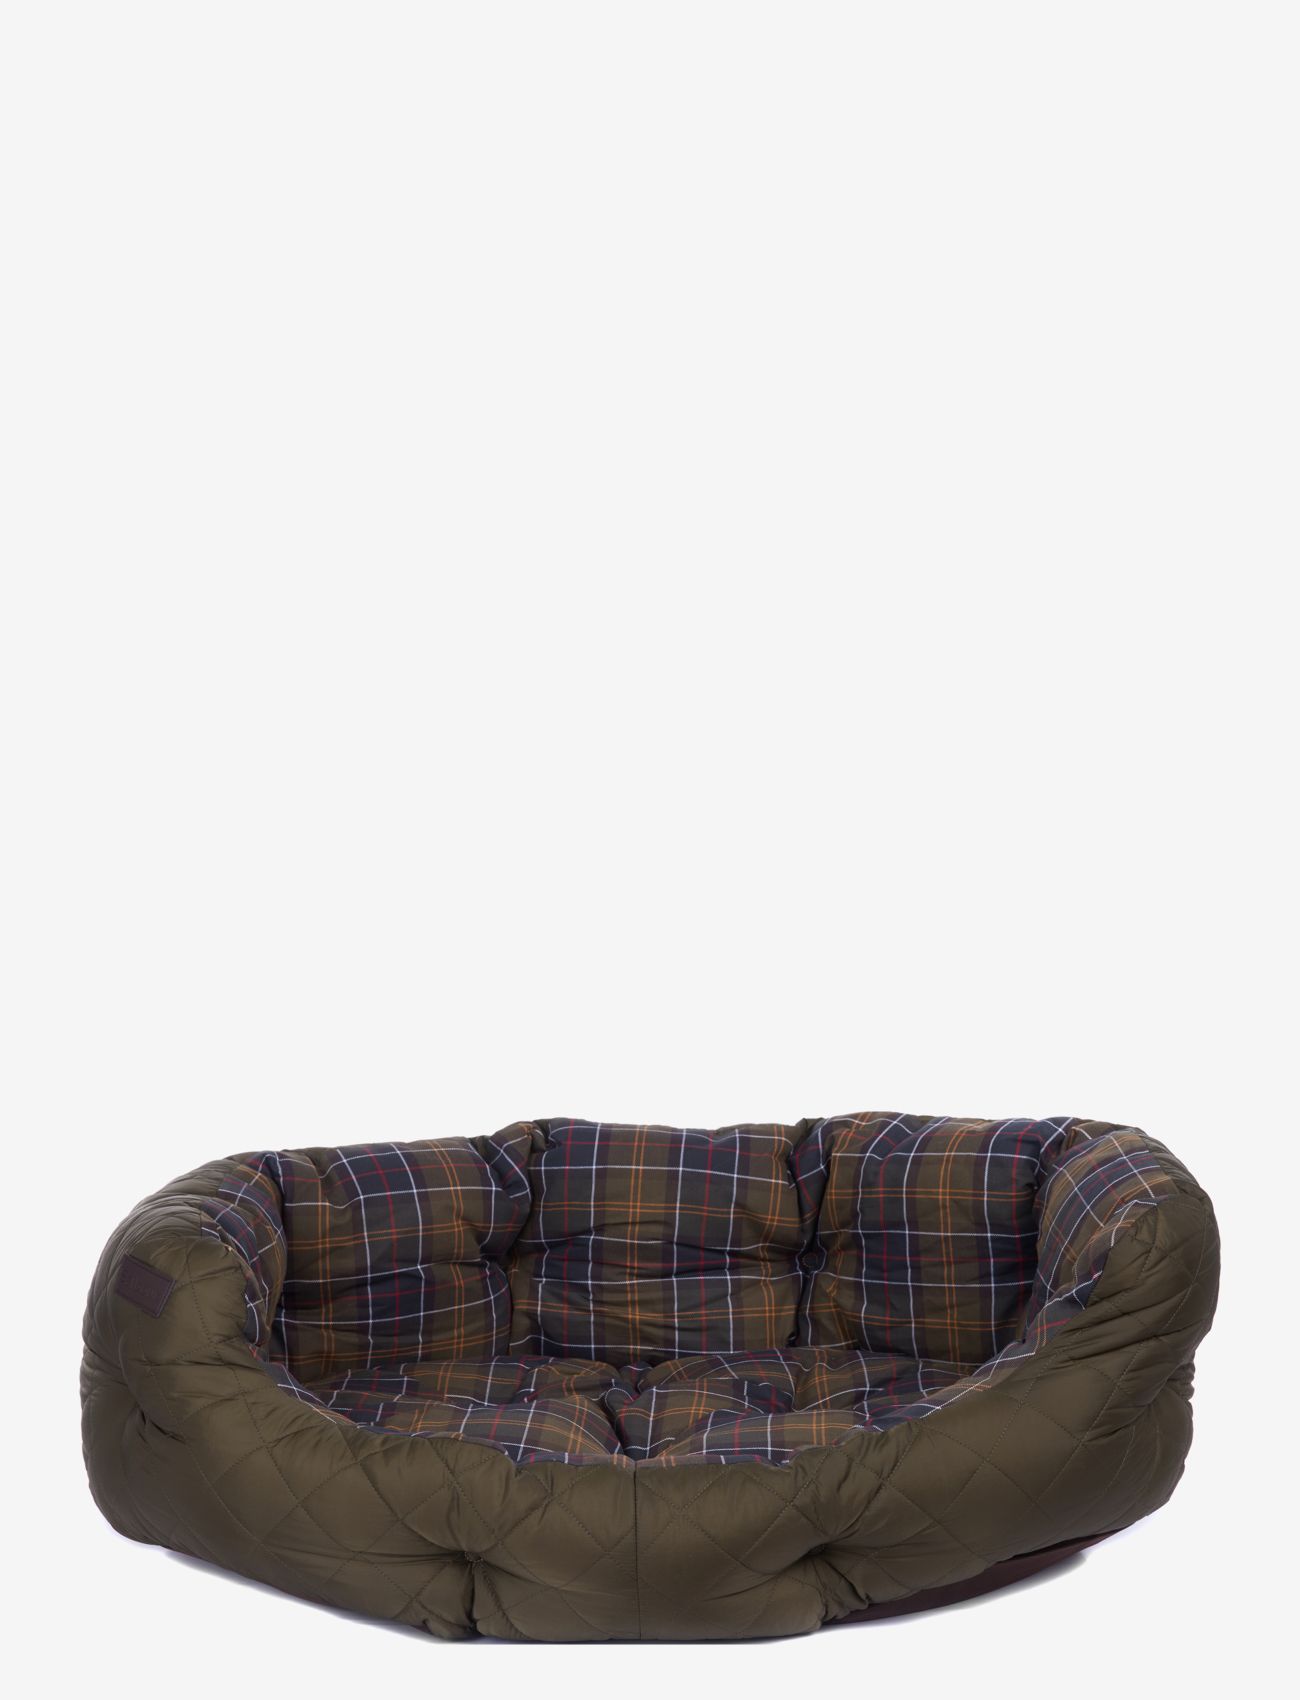 Barbour - Barbour Quilted Bed 35 - olive - 0